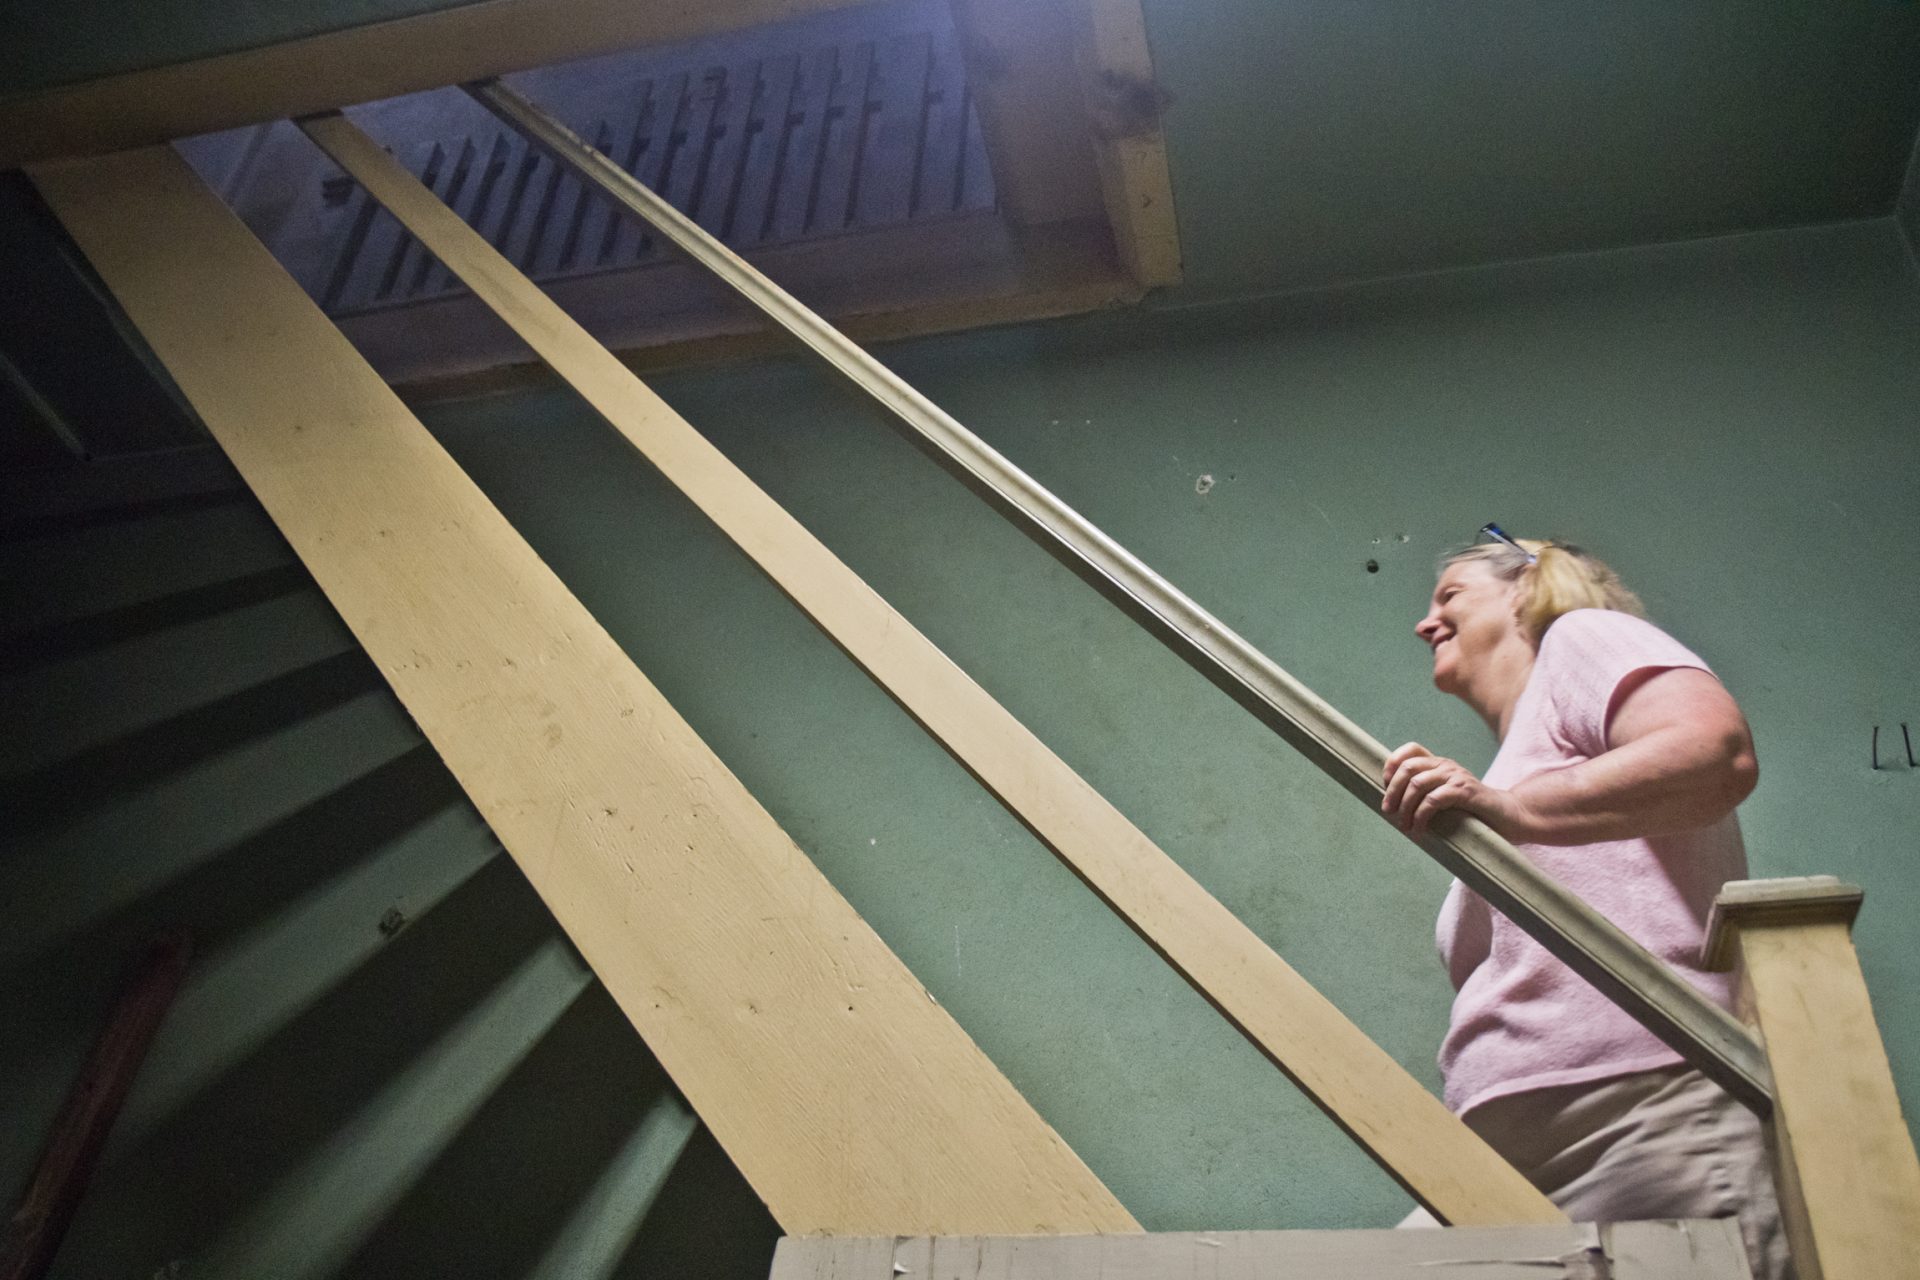 Carillon player Janet Tebbel climbs the steps to the bell tower at the Miraculous Medal Shrine.